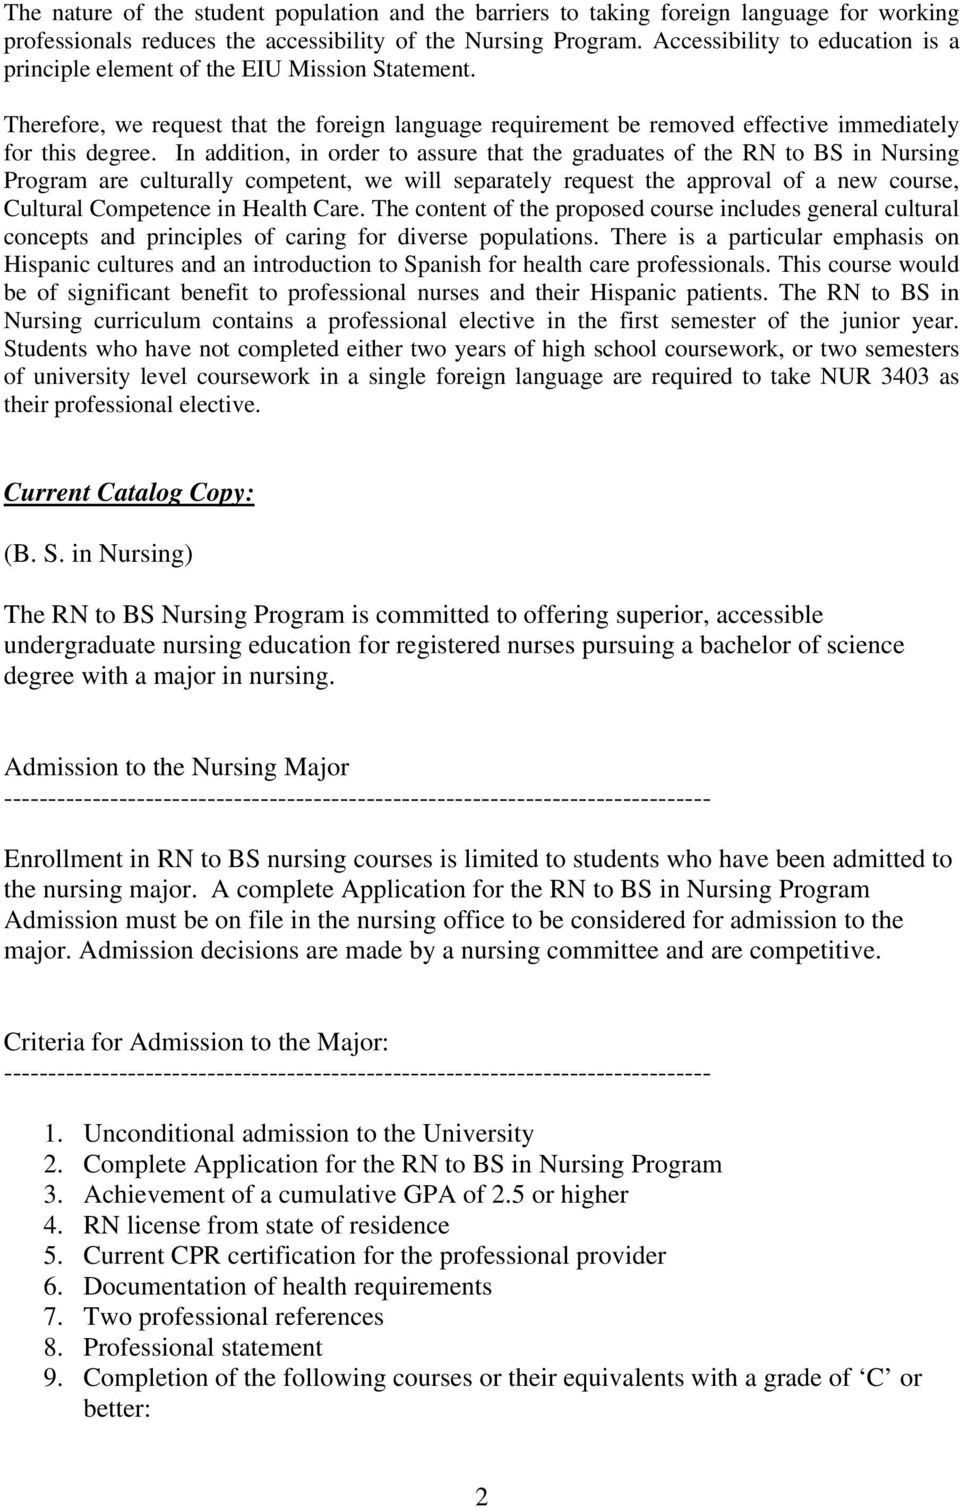 In addition, in der to assure that the graduates of the RN to BS in Nursing Program are culturally competent, we will separately request the approval of a new course, Cultural Competence in Health